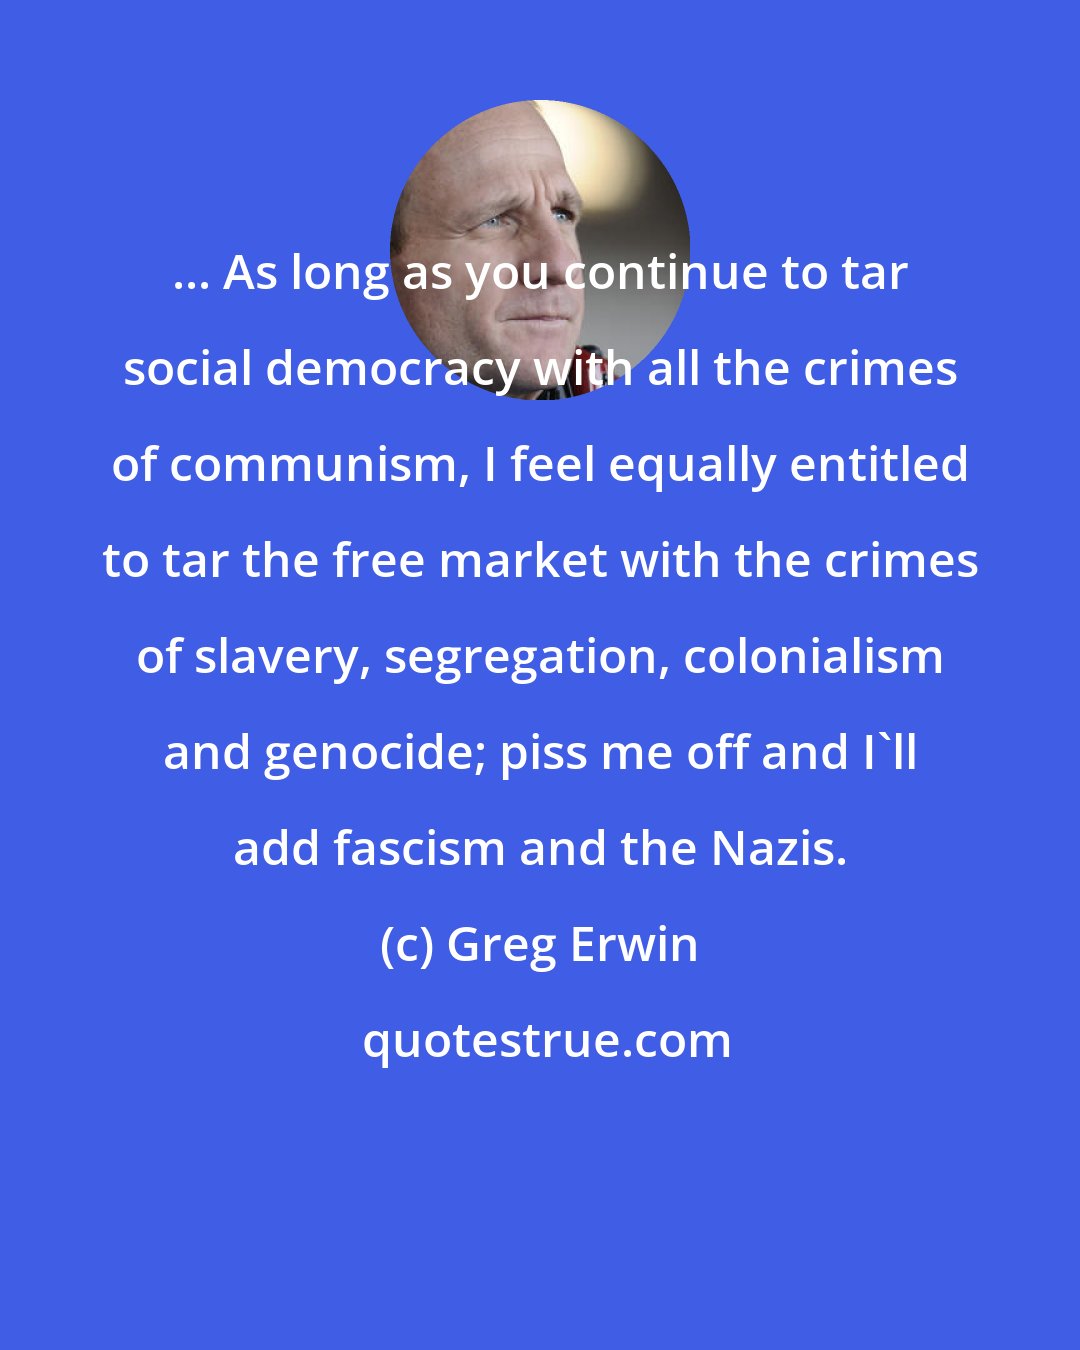 Greg Erwin: ... As long as you continue to tar social democracy with all the crimes of communism, I feel equally entitled to tar the free market with the crimes of slavery, segregation, colonialism and genocide; piss me off and I'll add fascism and the Nazis.